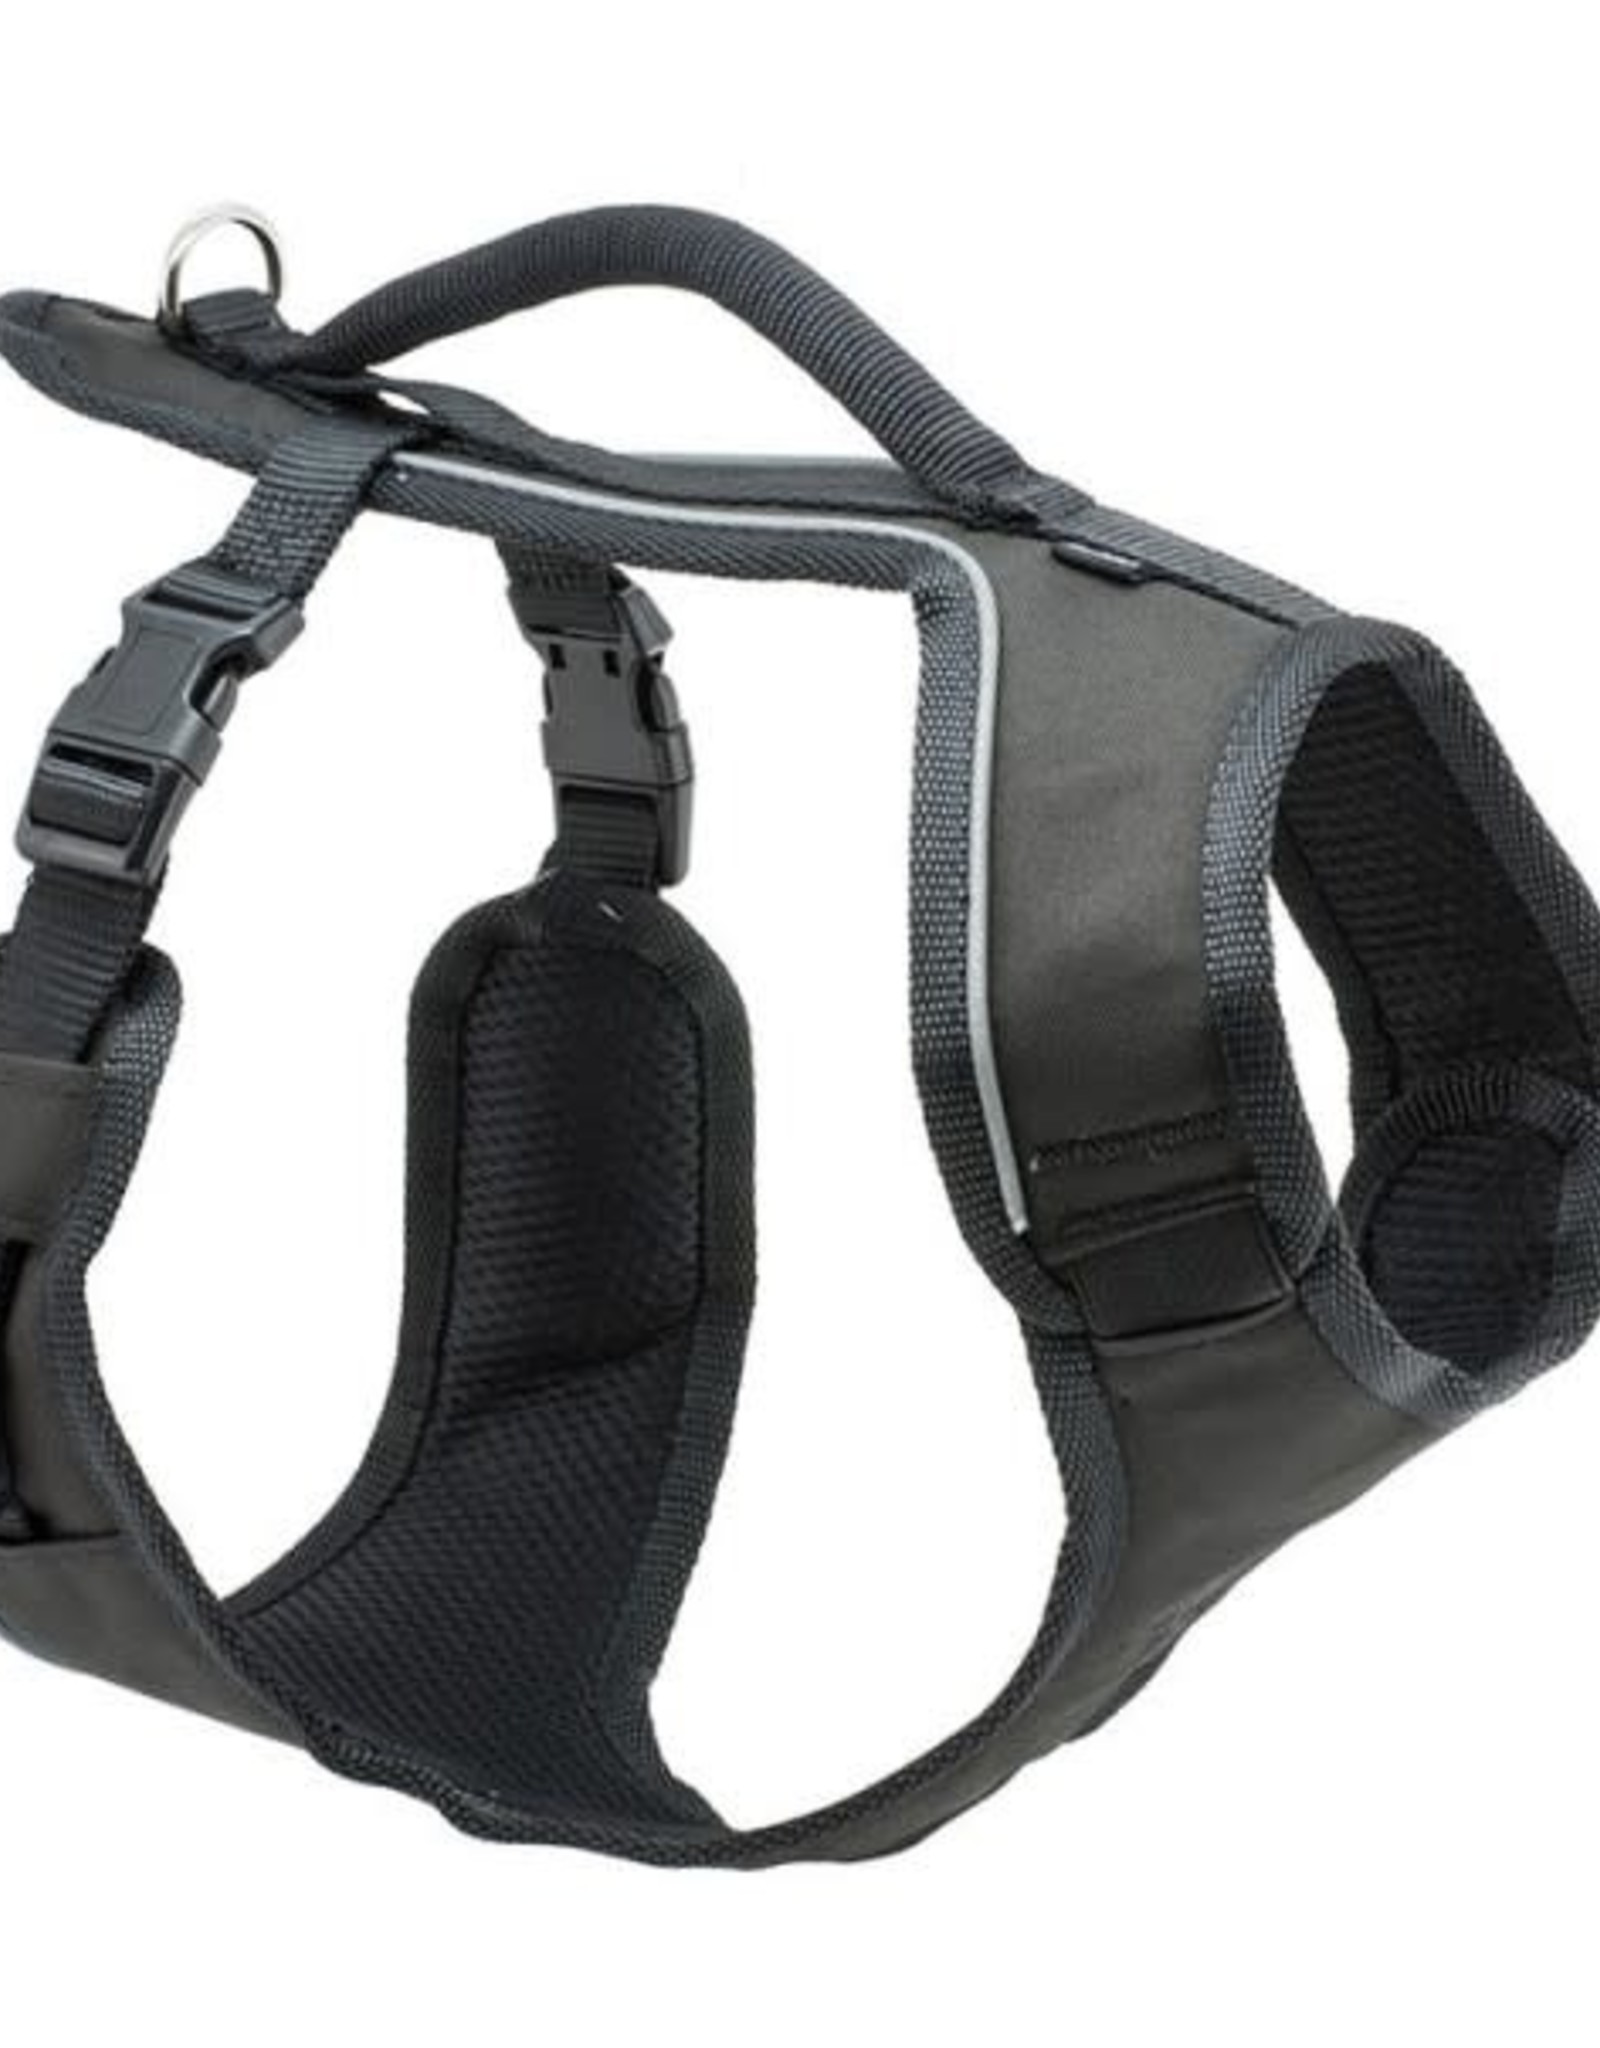 RADIO SYSTEMS CORP(PET SAFE) EASYSPORT Harness Black x-small